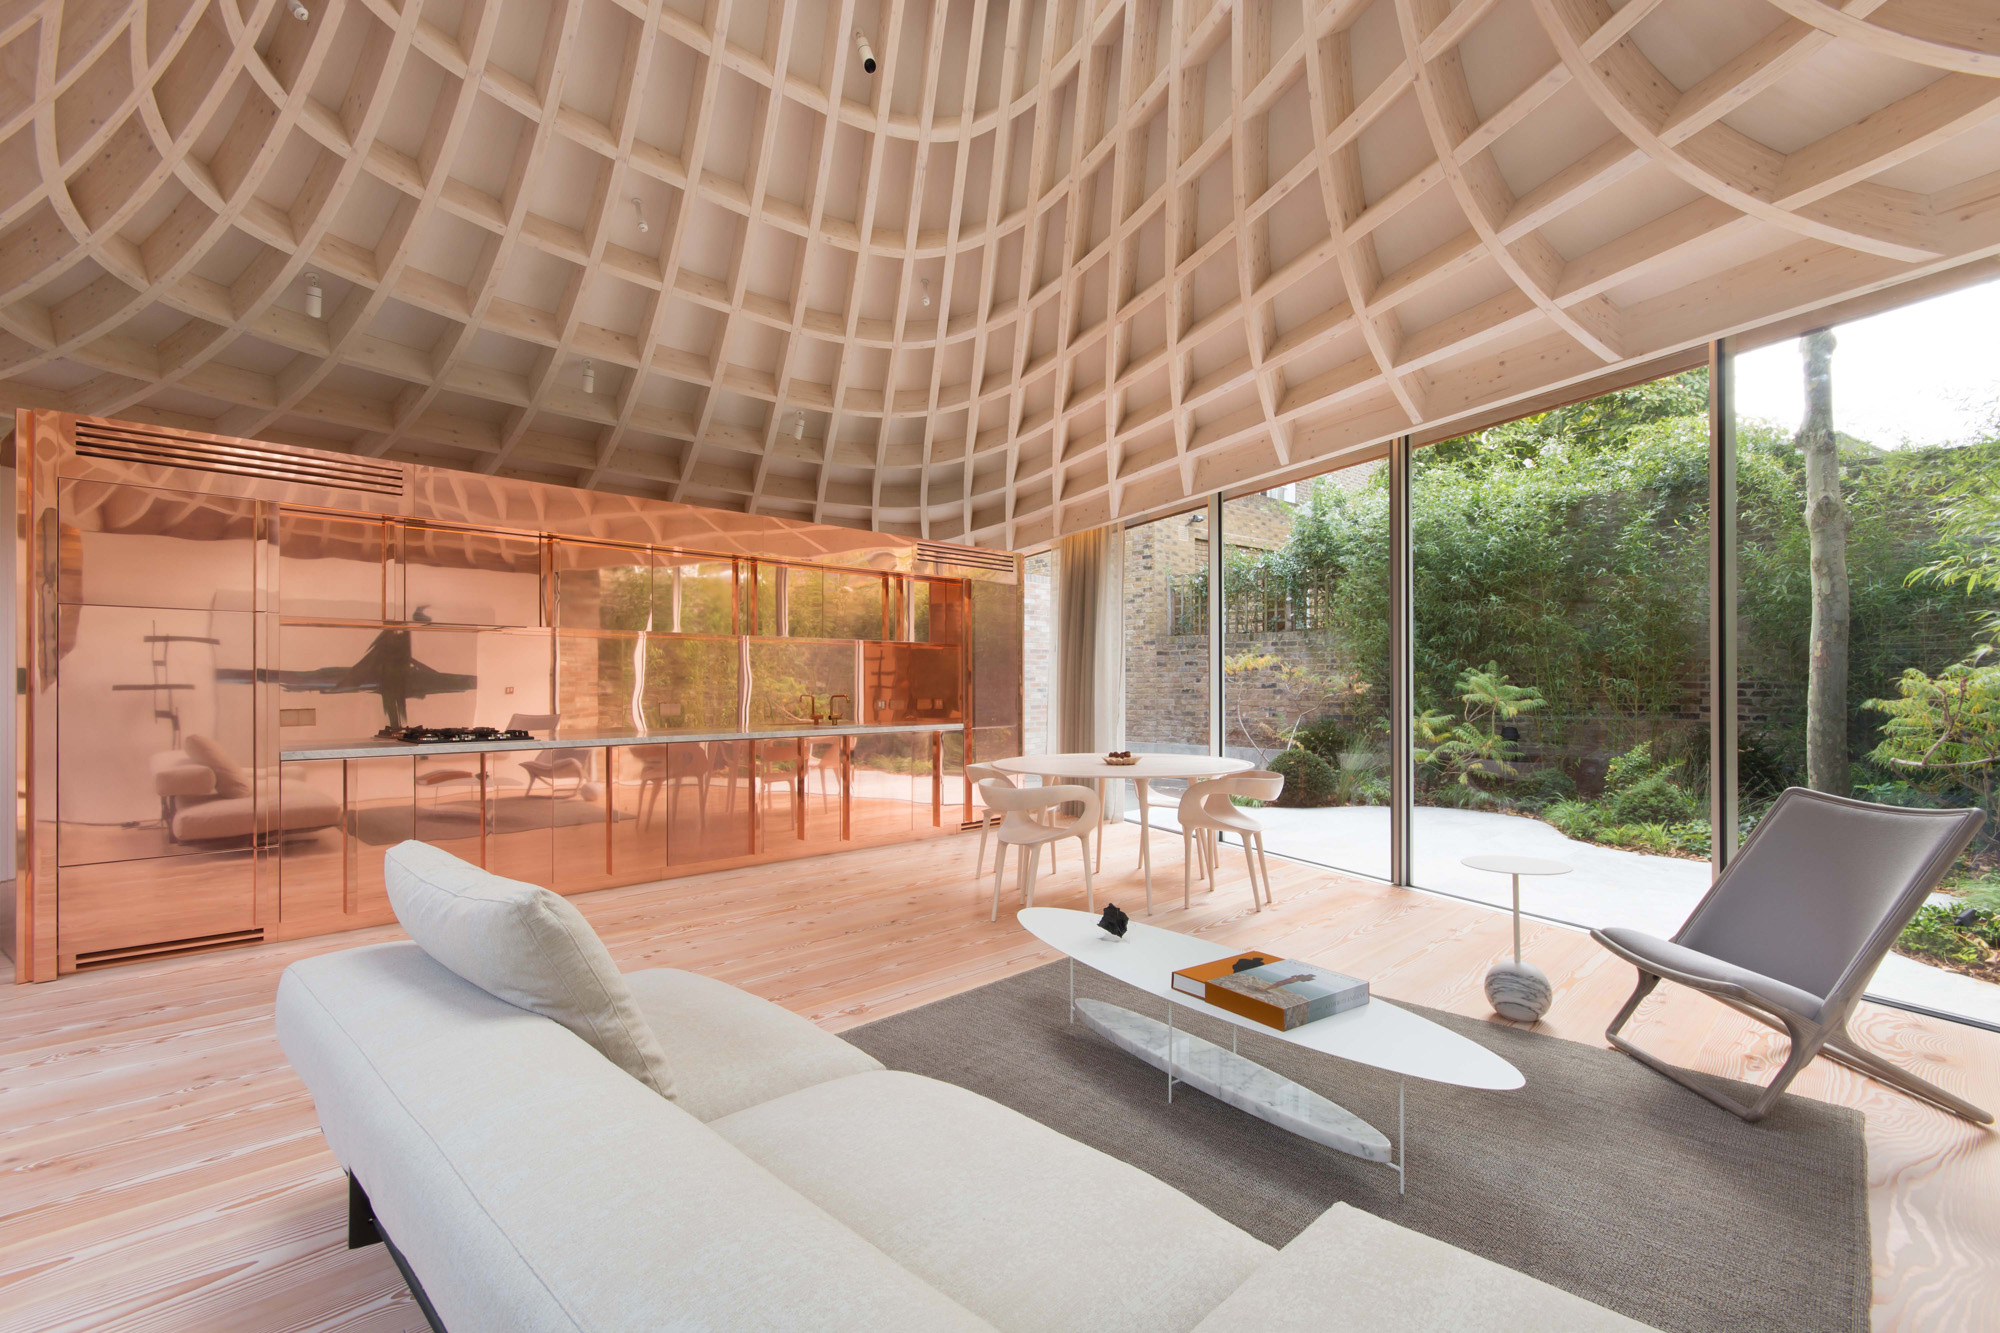 Pavilion House with its cone-shaped wood roof